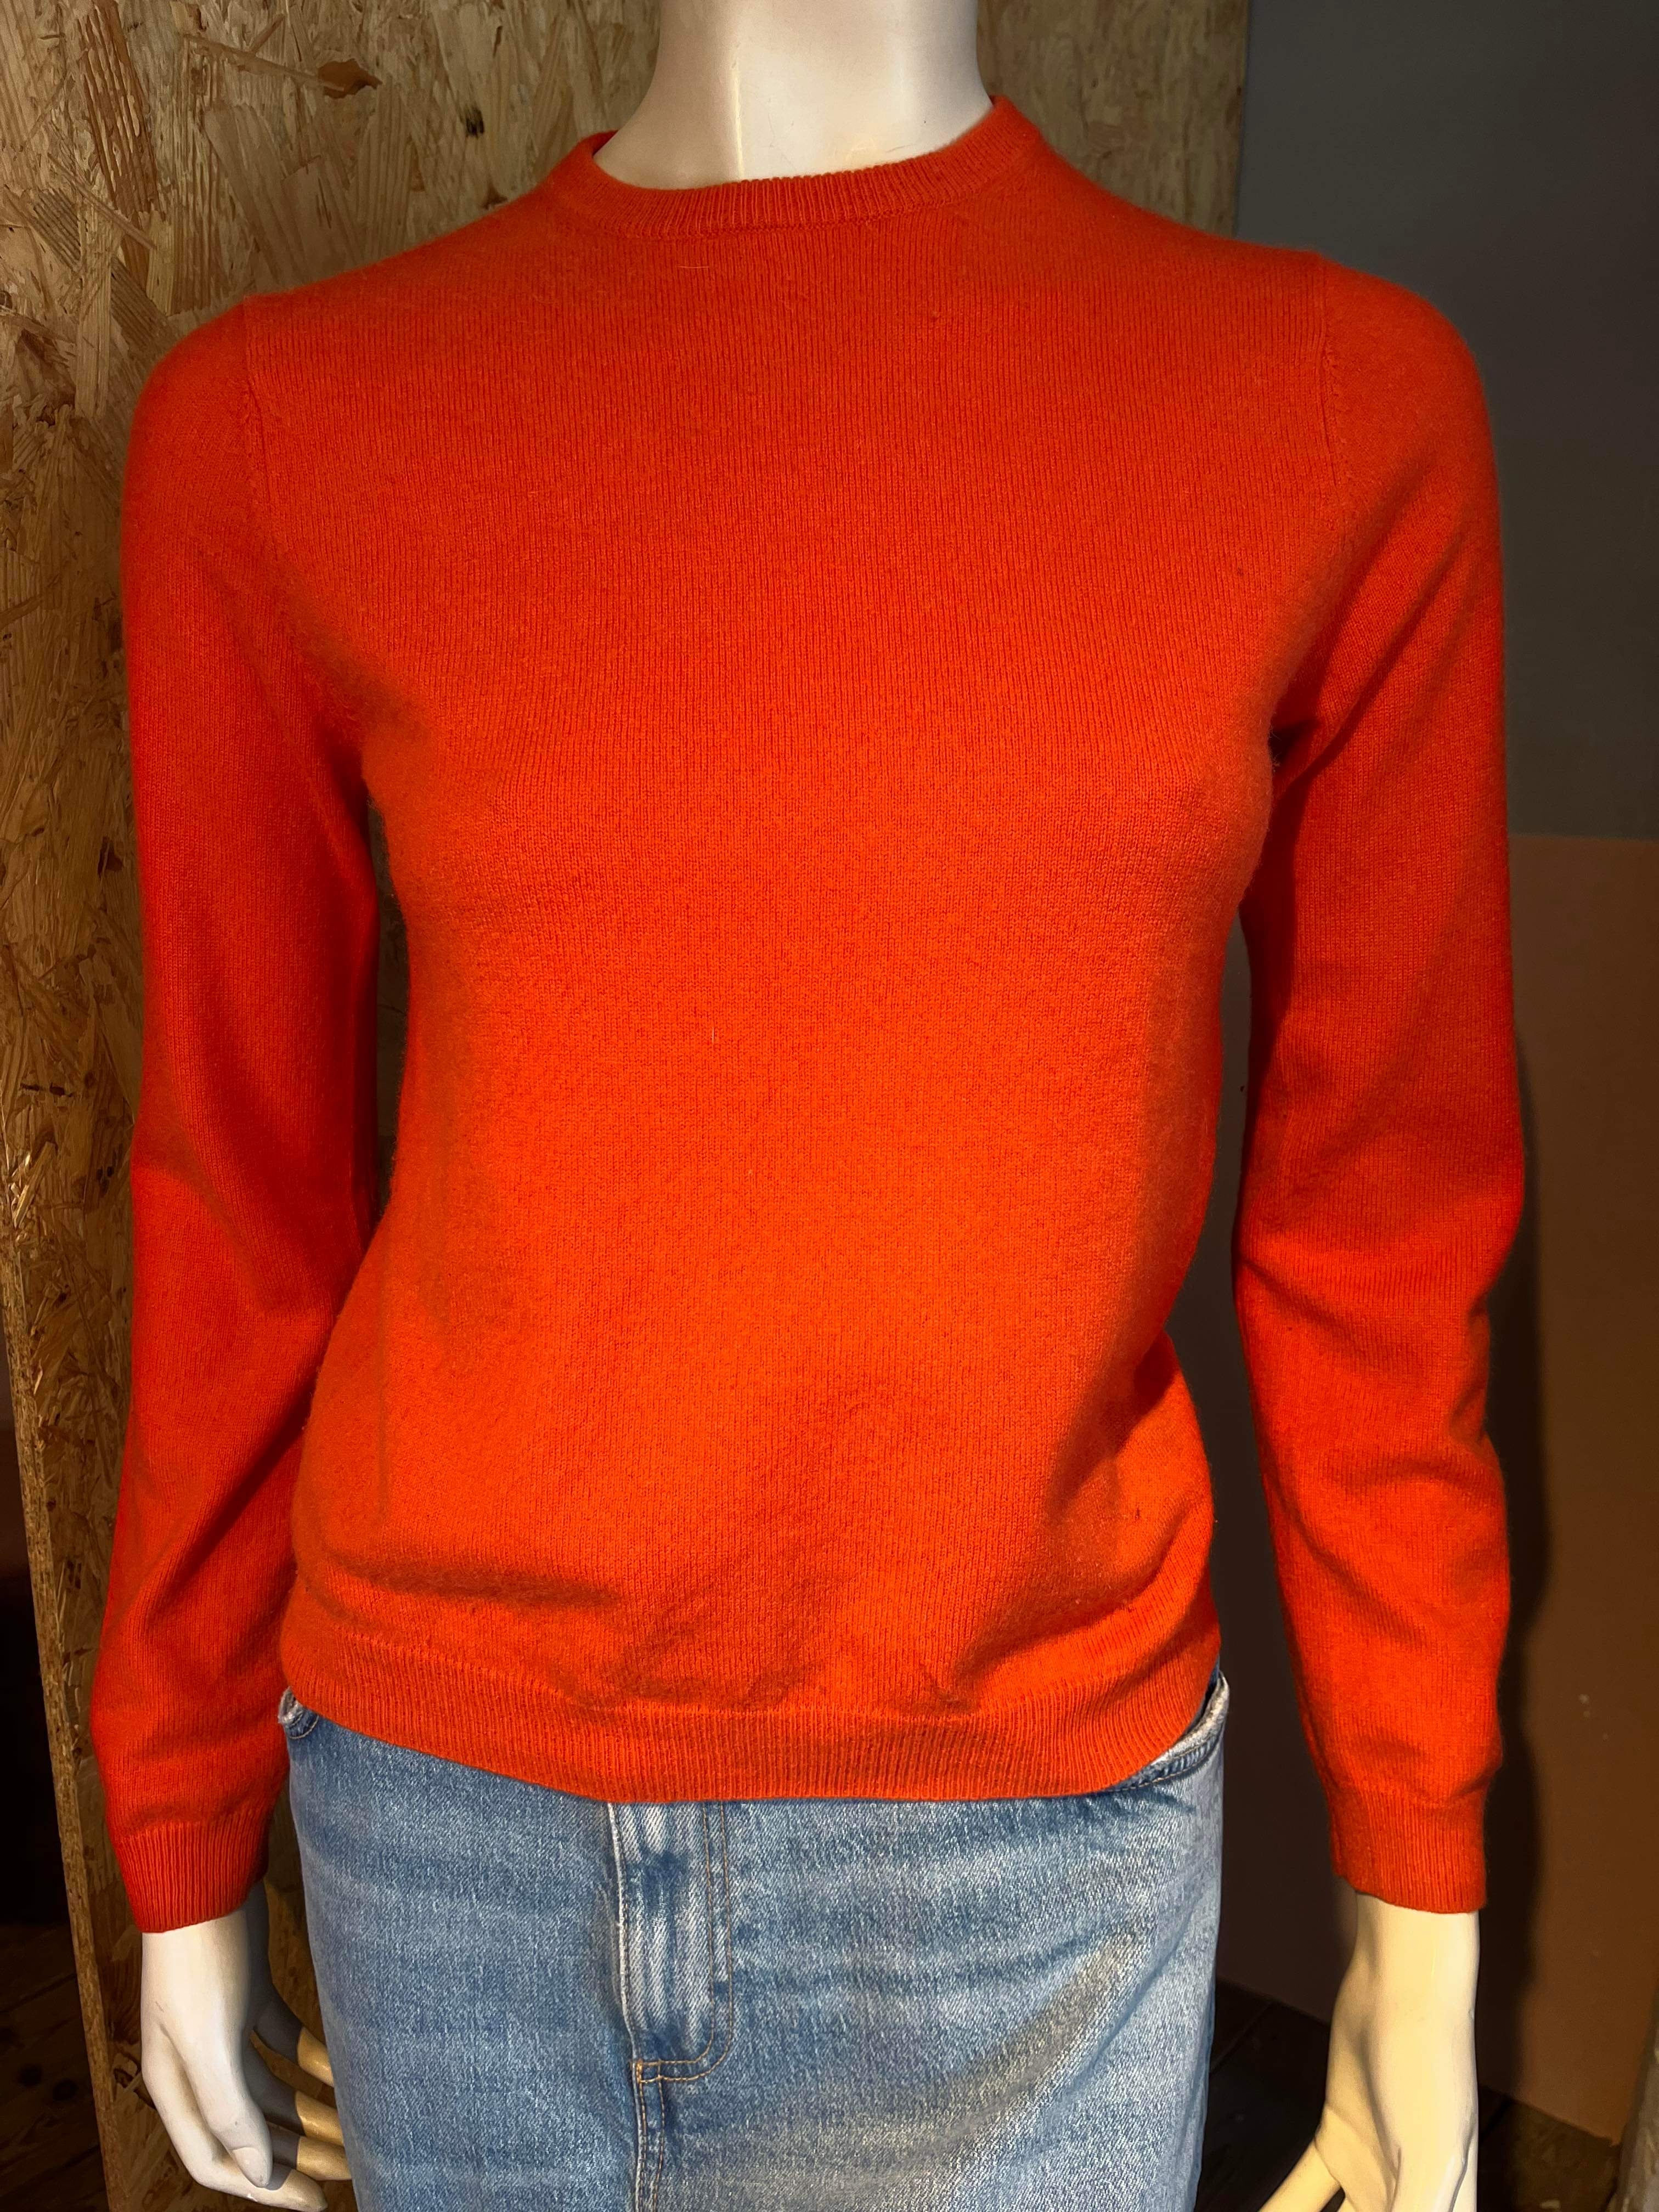 People's Republic of Cashmere - Sweater - Size: S